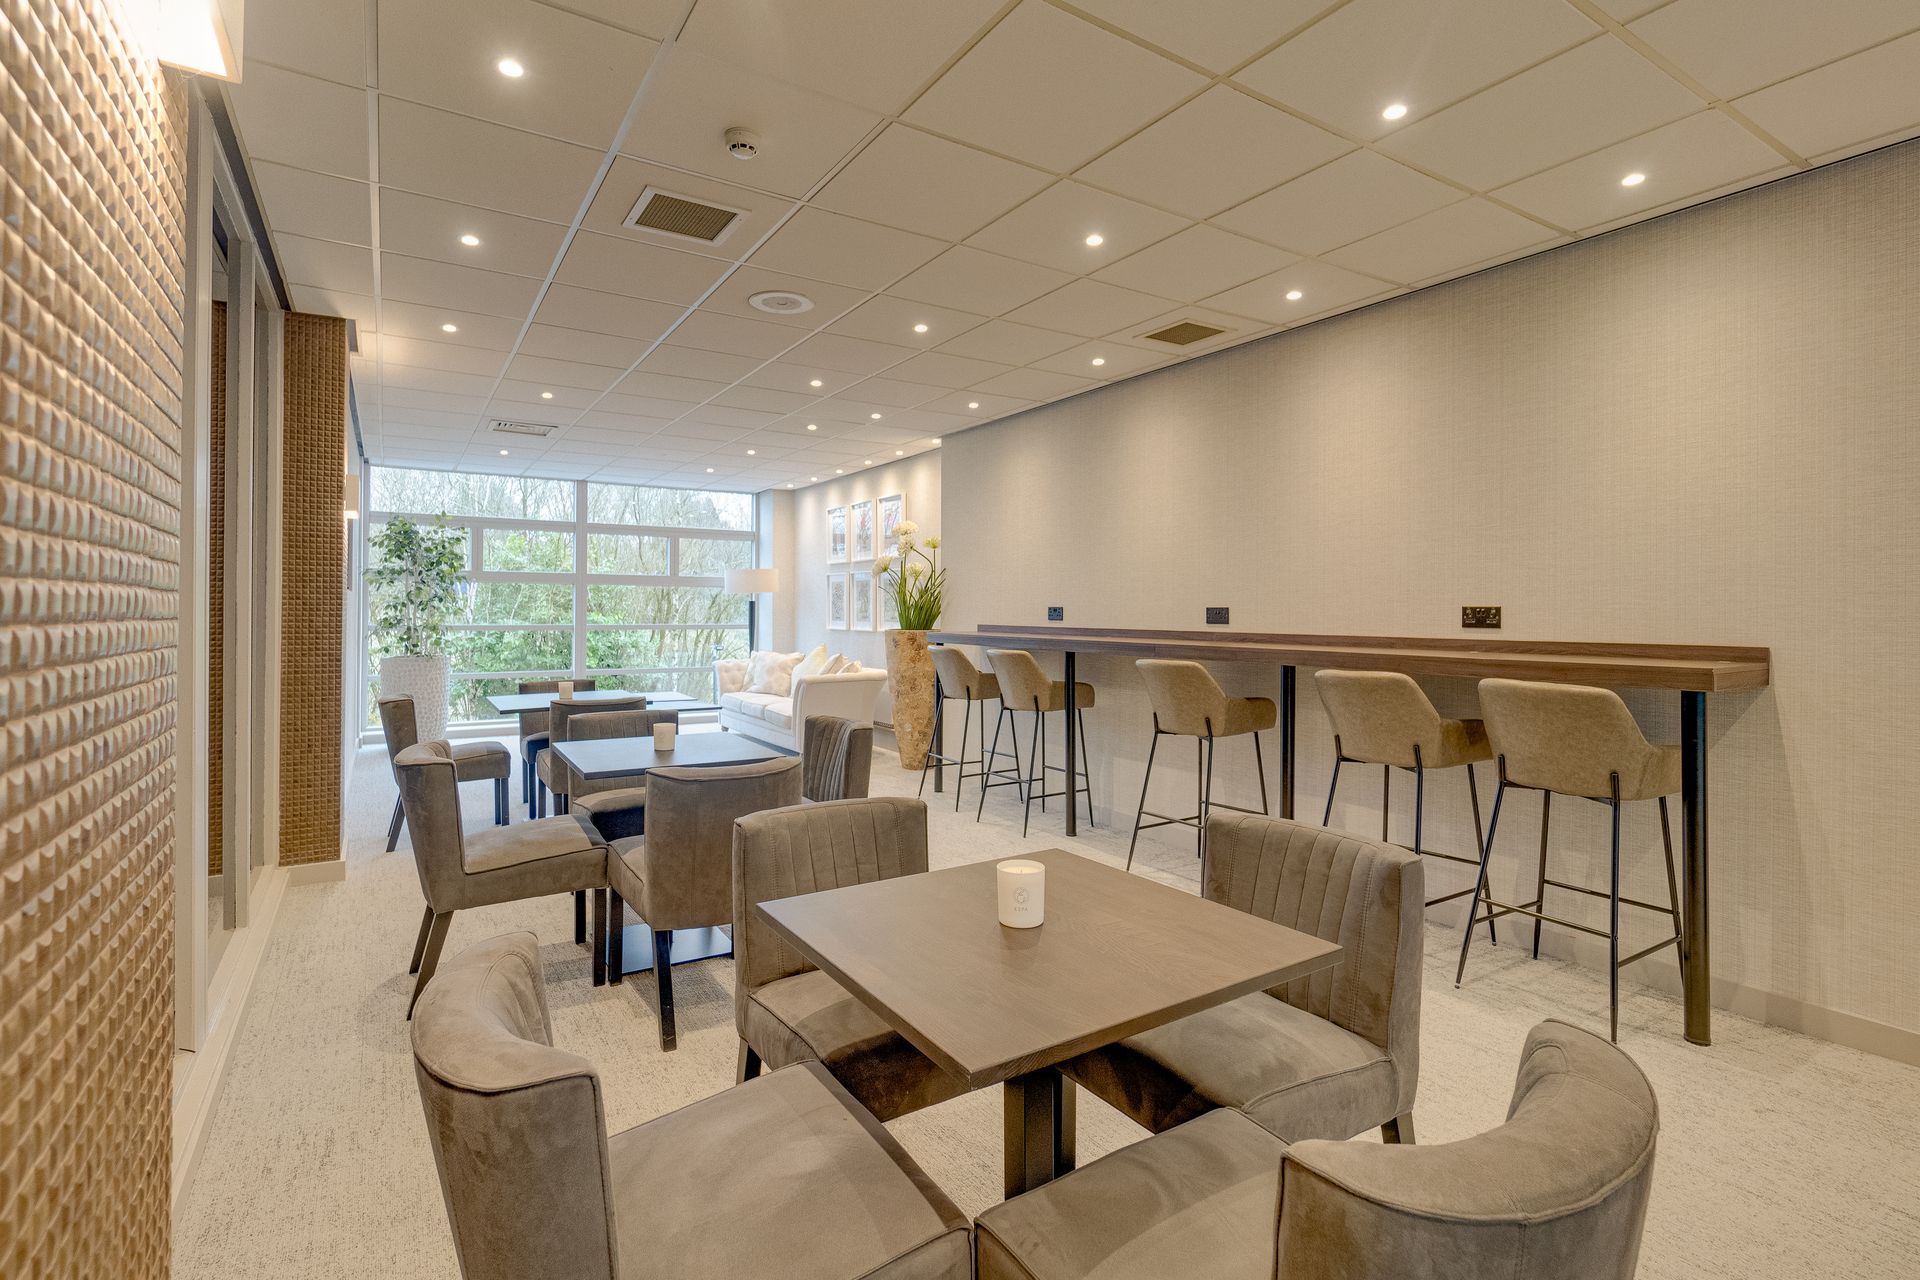 Members Lounge At The Wrightington Hotel Healtch Club And Spa 57